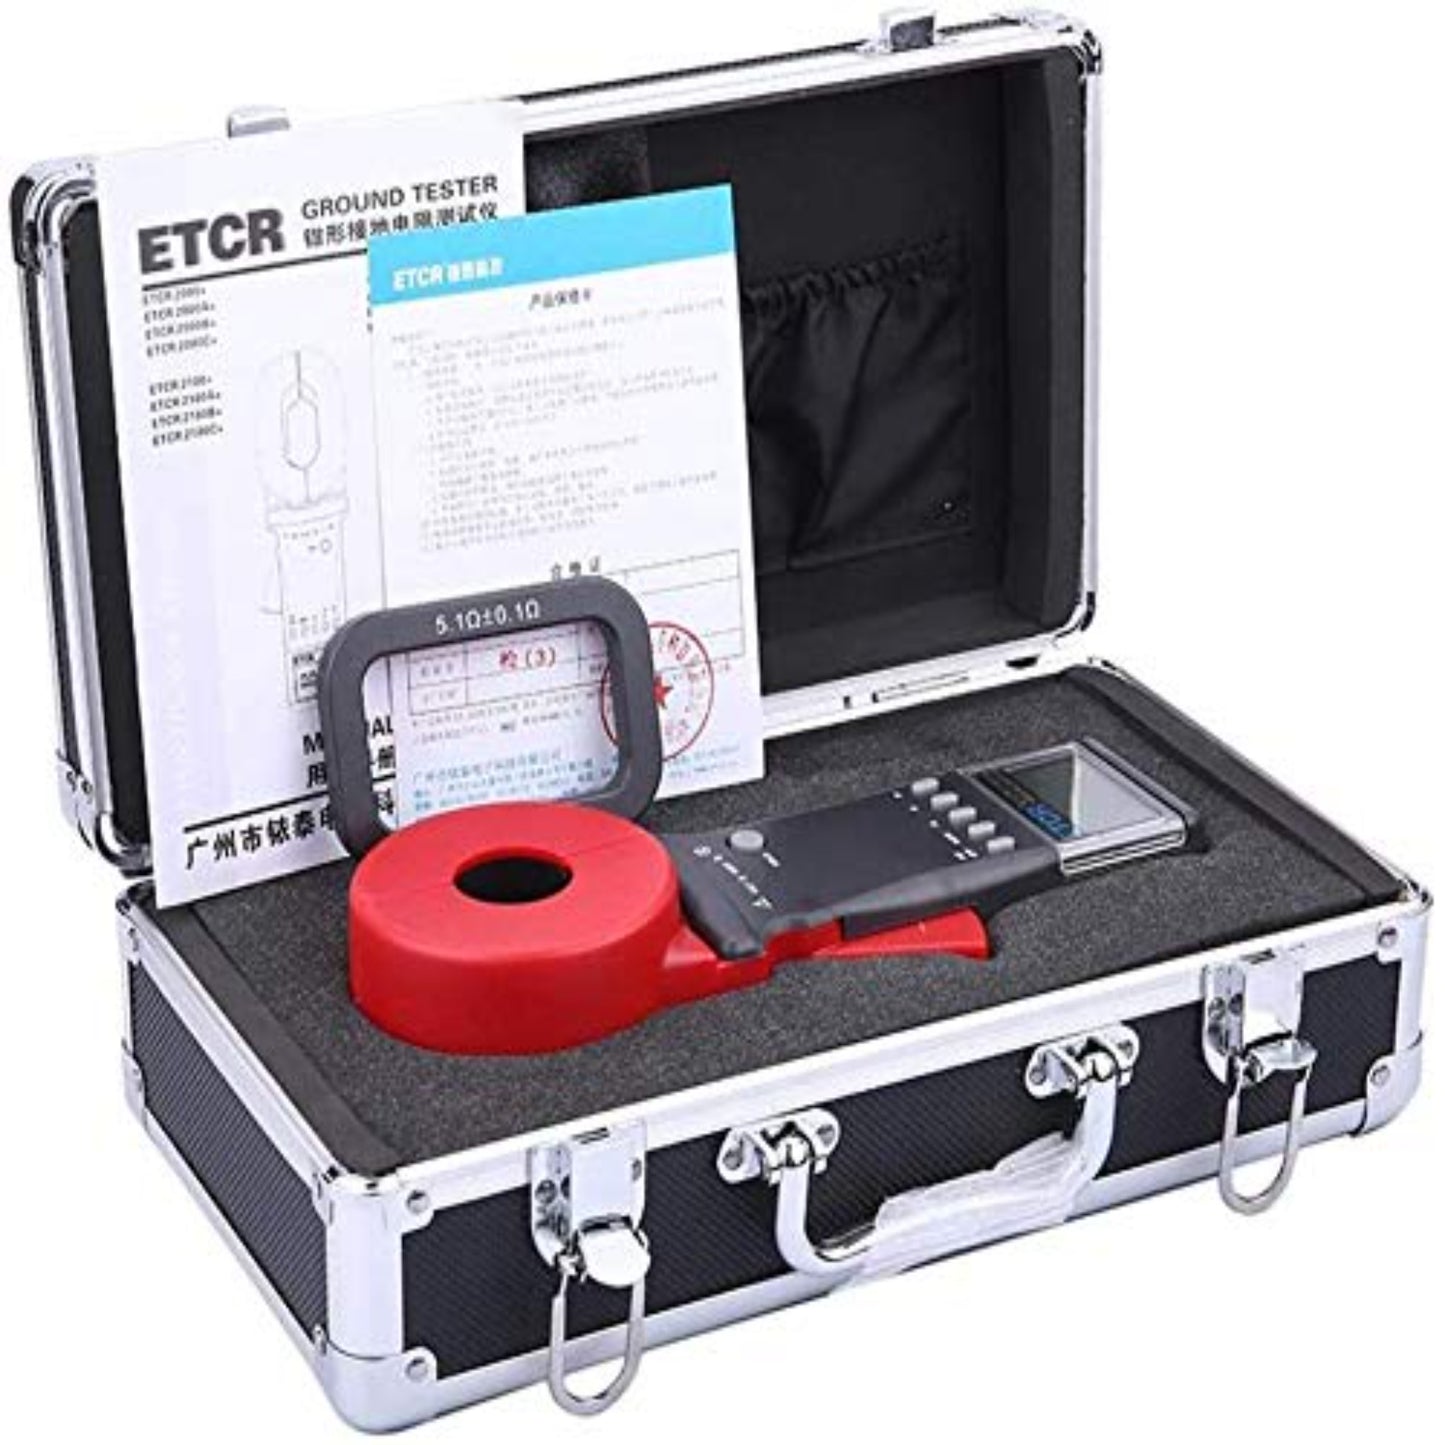 VTSYIQI Ground Resistance Tester Digital Clamp On Ground Earth Resistance Meter Tester With Resistance Range 0.01 to 200Ω For Electric Power Telecommunications Meteorology Oil Field Architecture Industrial Electrical Equipment